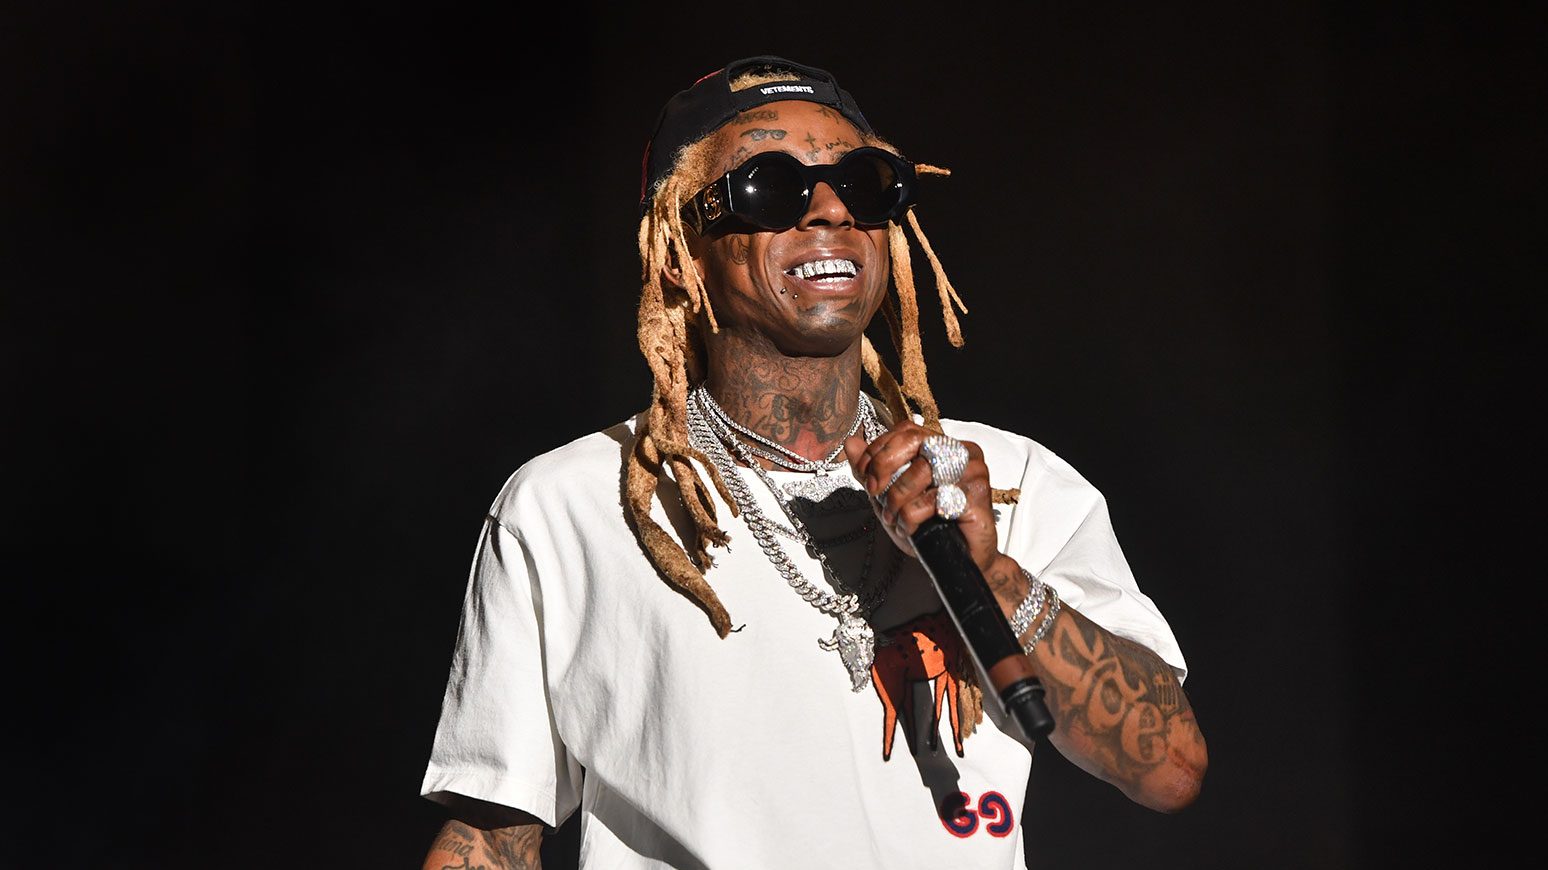 150 New Orleans Children Receive Gifts And A "Weezy Christmas" Party From Lil Wayne